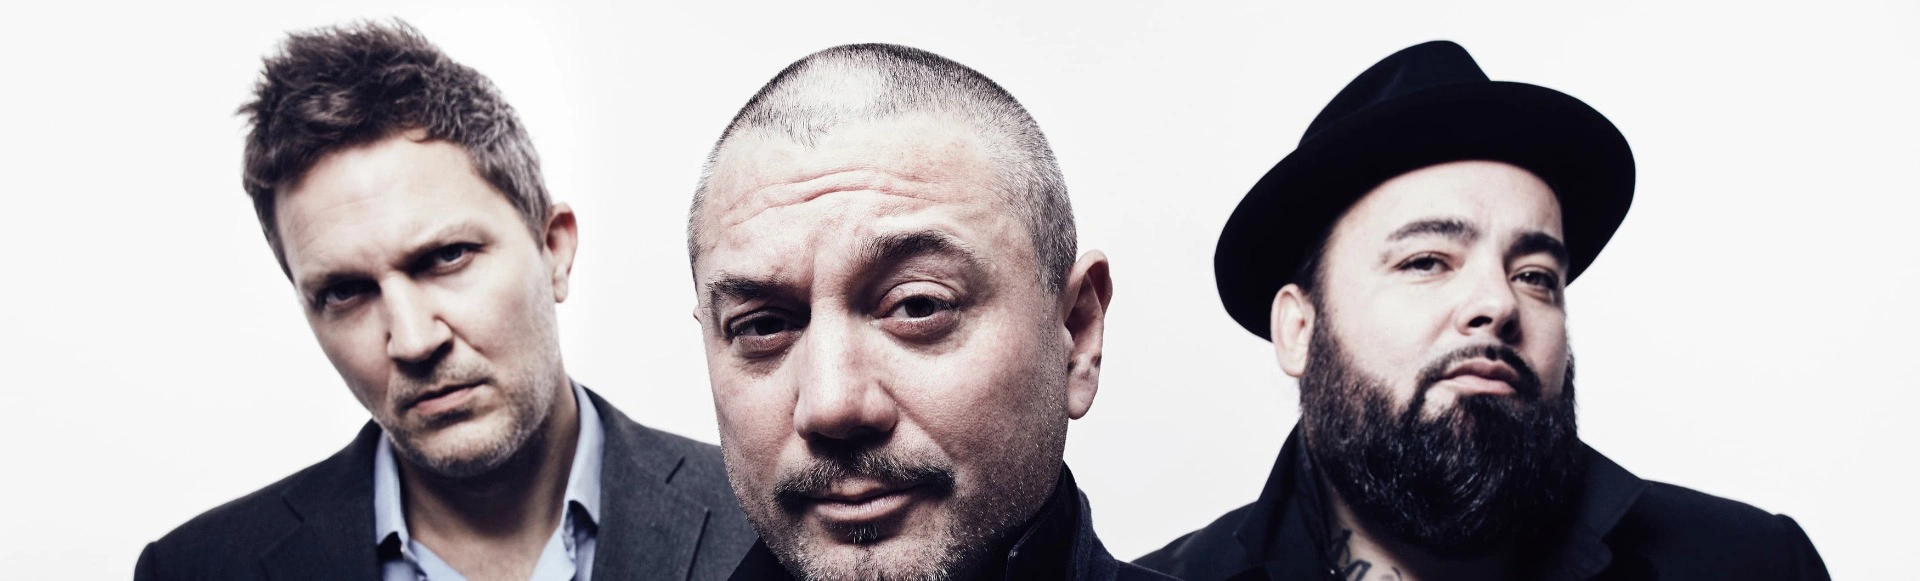 LOADED featuring Stereo MC, Fun Lovin' Criminals, Toploader and Dodgy